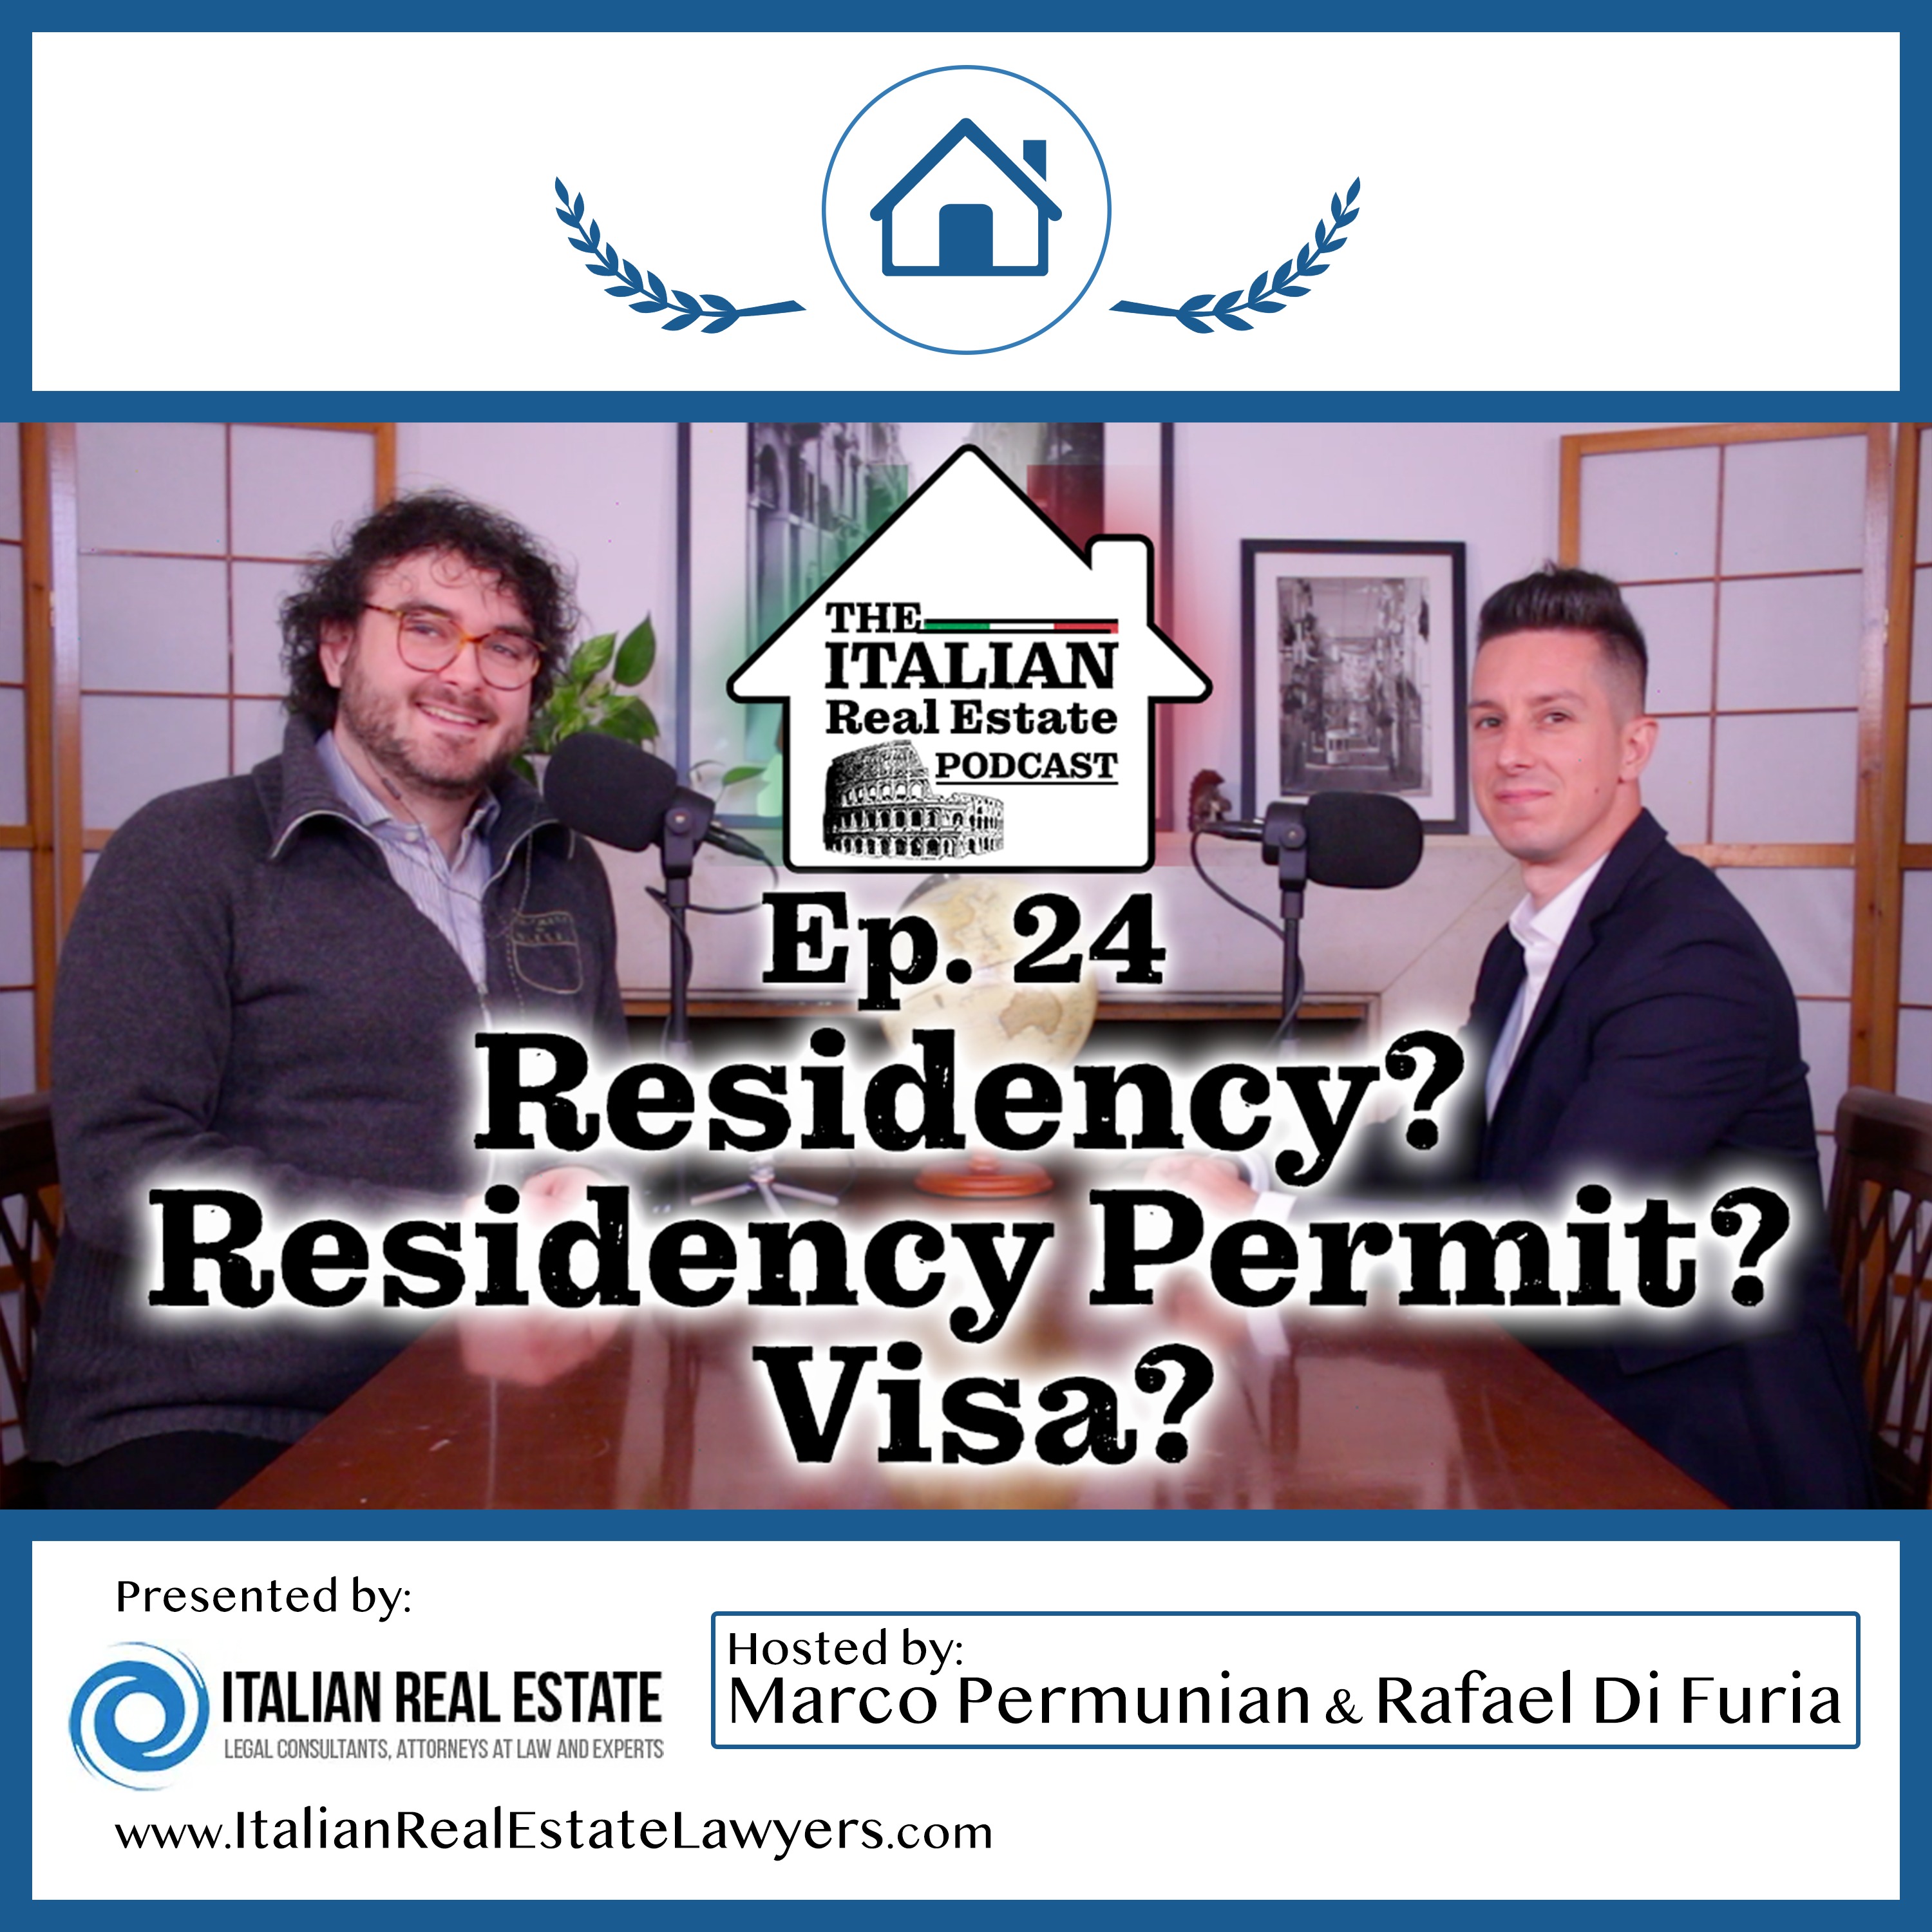 Italian Visa Vs Residency Permit VS Residency in Italy - What are the differences?